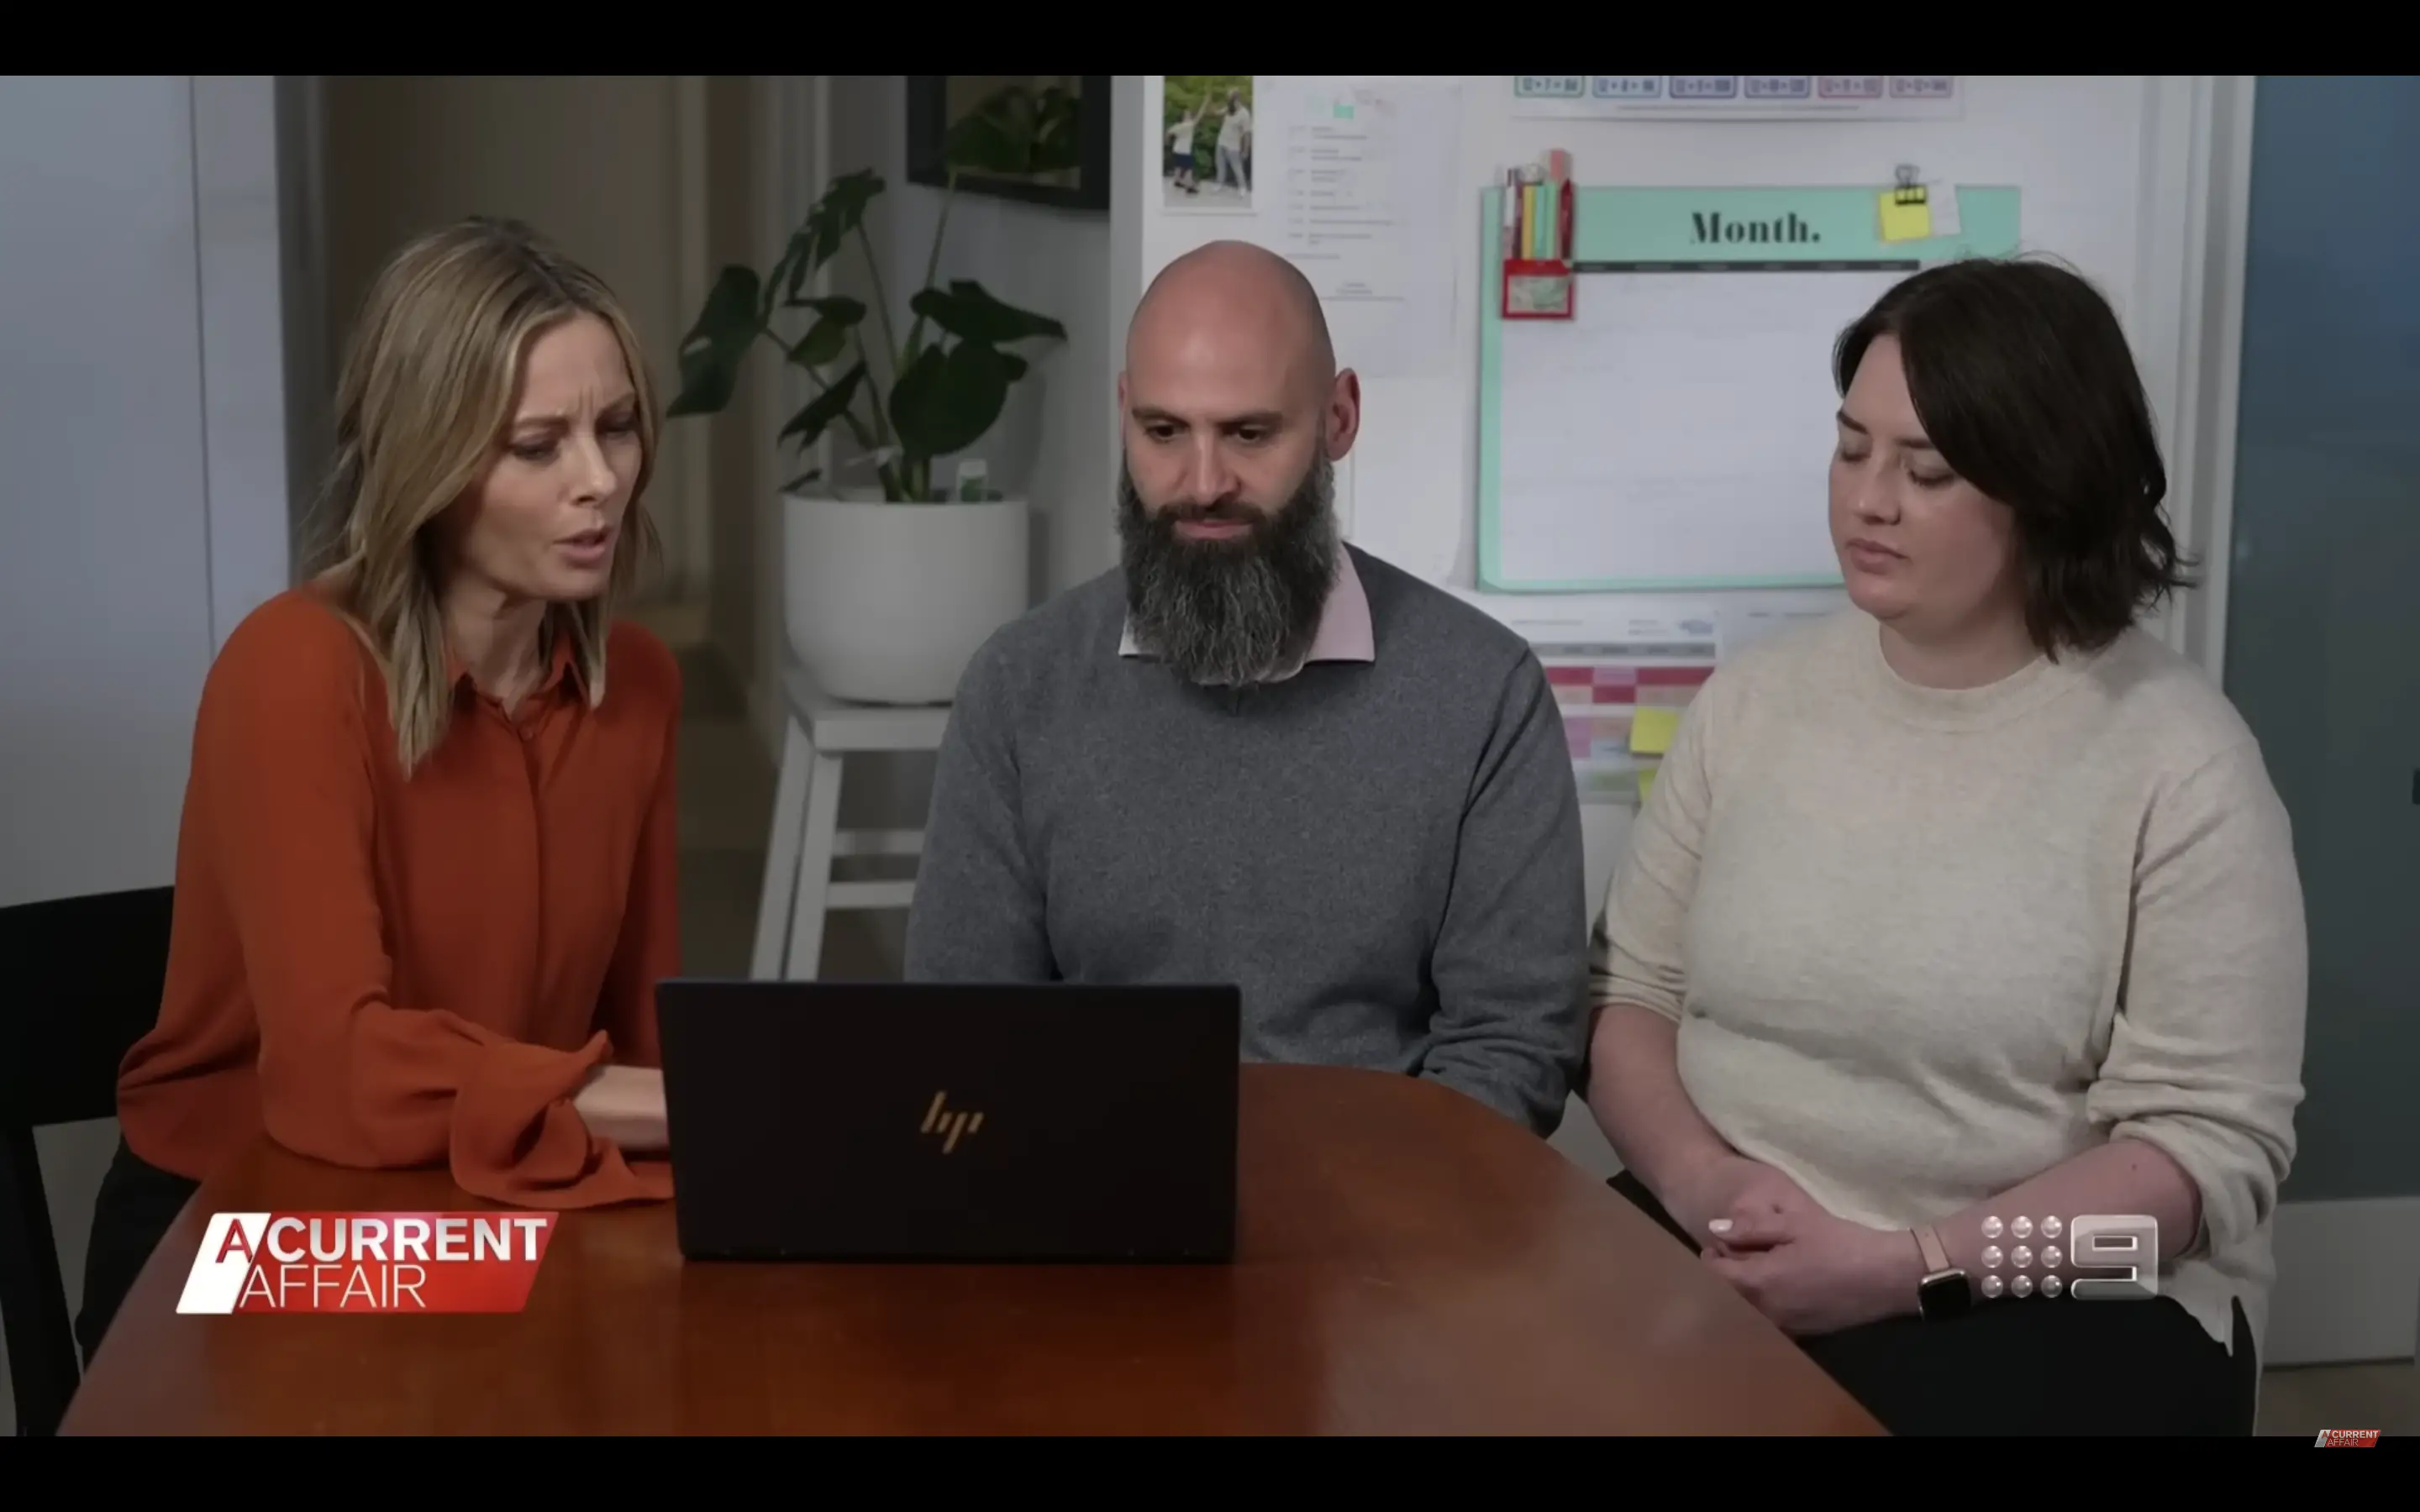 Leah and Vince with an interviewer watching the controversial video.│Source: youtube.com/A Current Affair